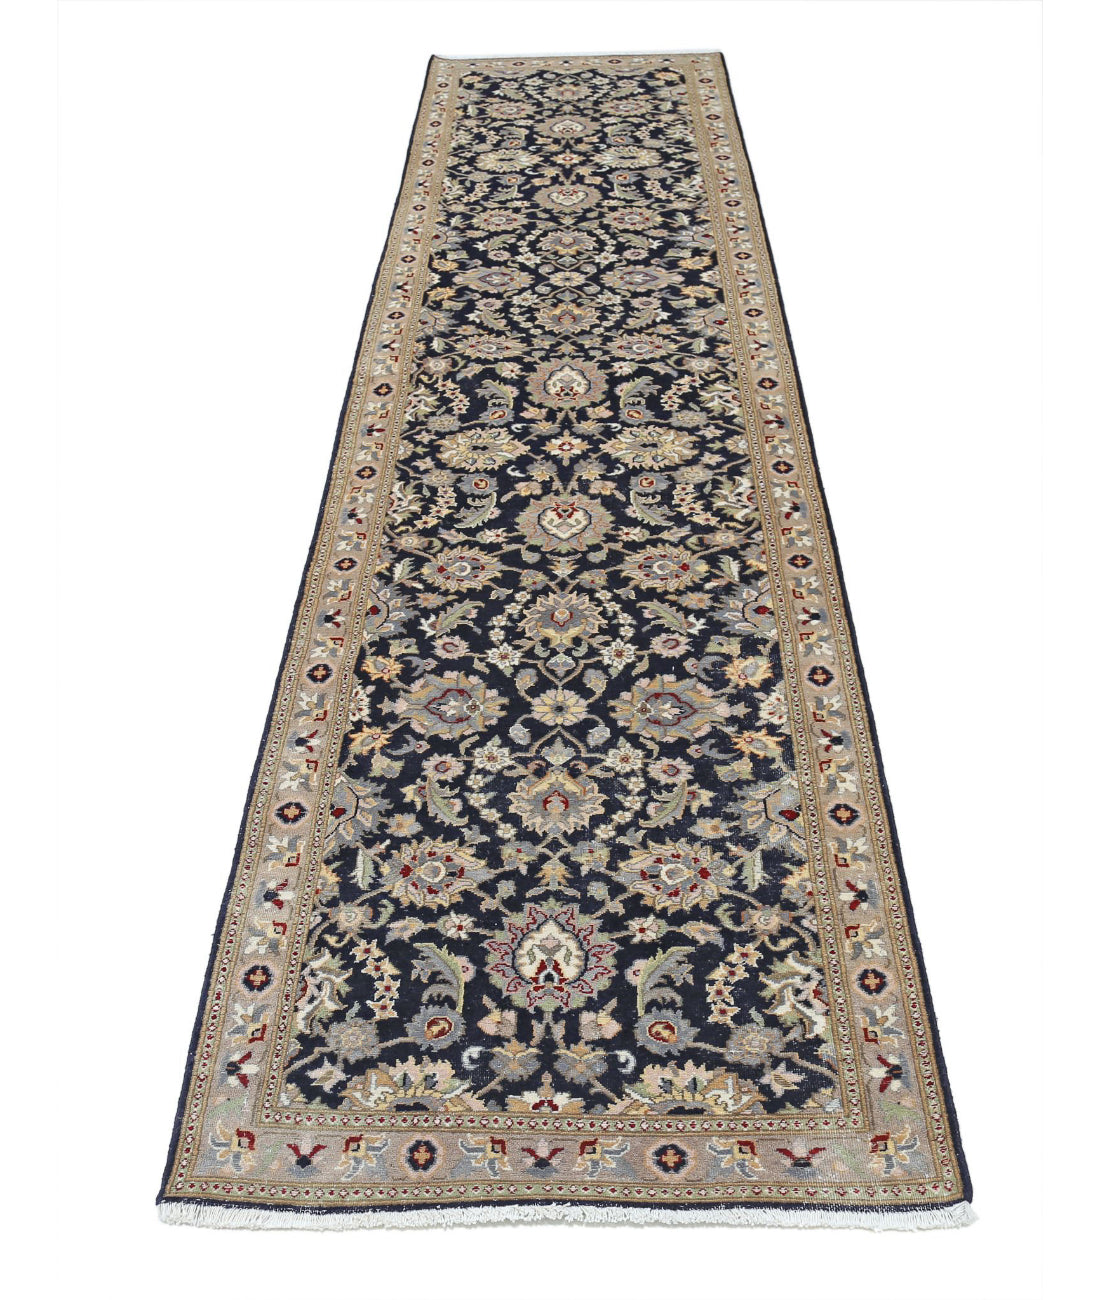 Heritage 2'7'' X 11'1'' Hand-Knotted Wool Rug 2'7'' x 11'1'' (78 X 333) / Blue / Tan